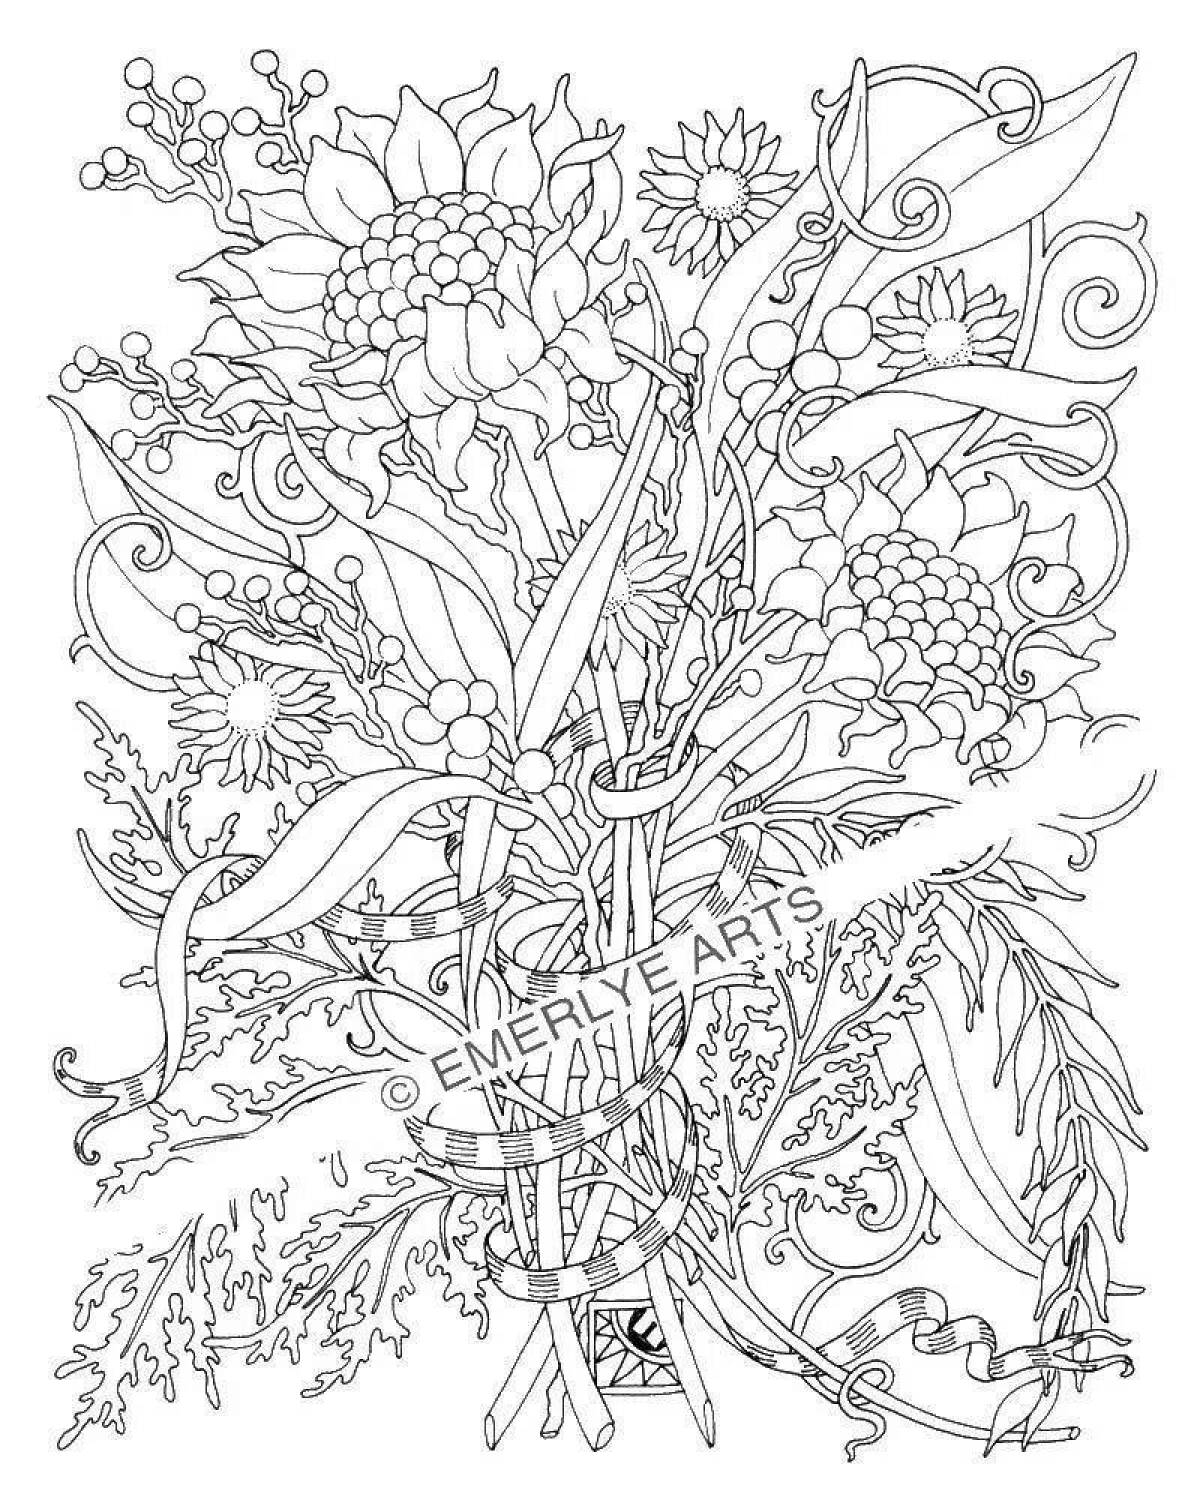 Charming complex coloring book